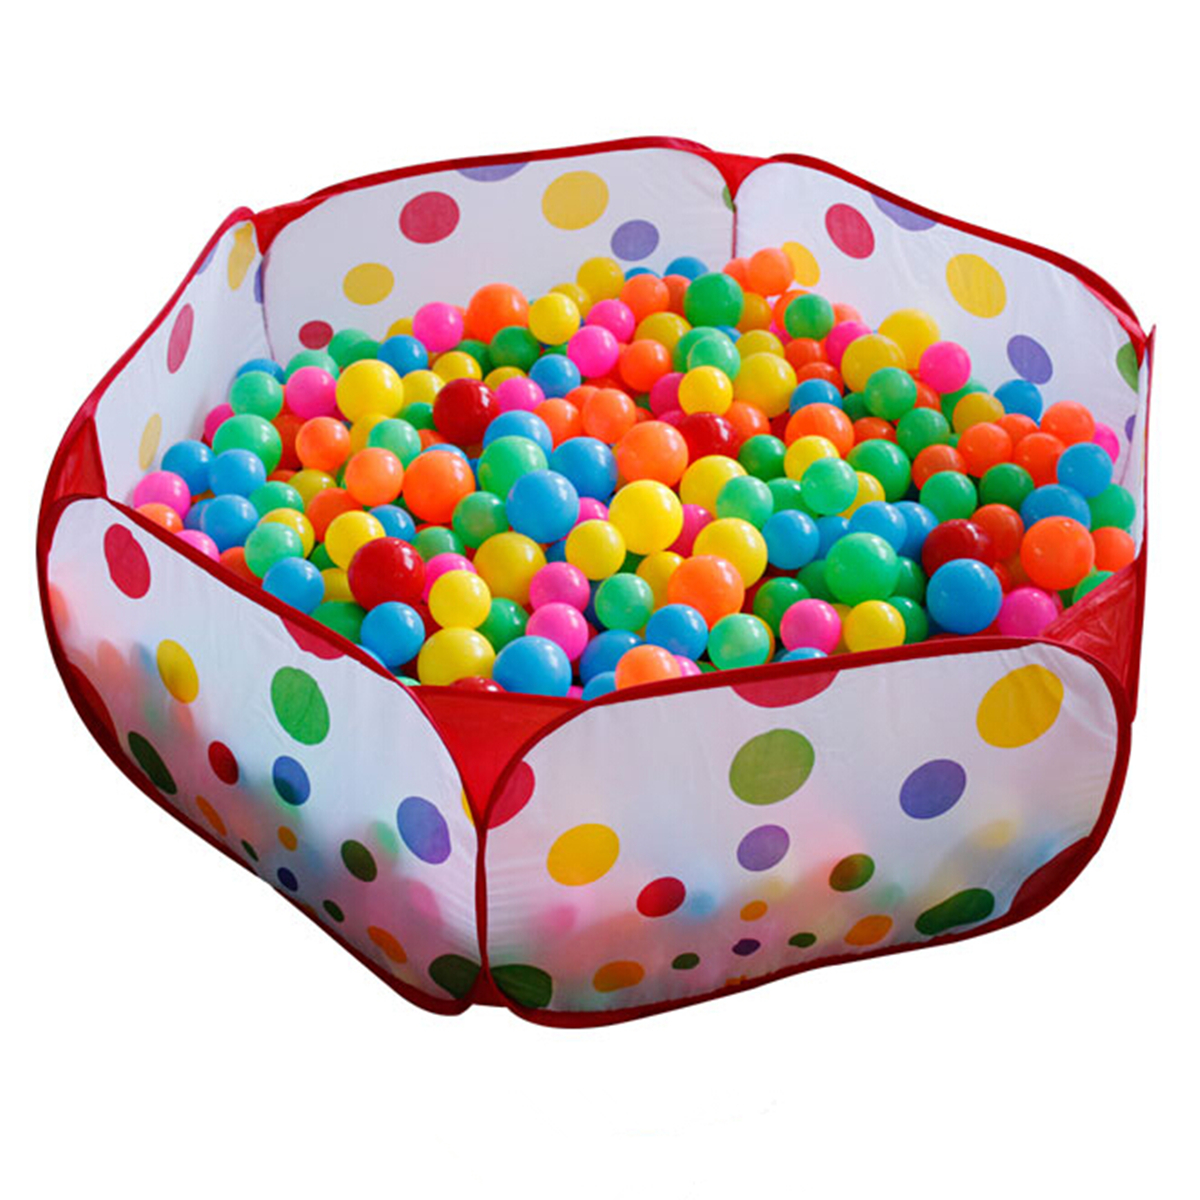 Portable-Foldable-Ocean-Ball-Pit-Pool-Holder-Indoor-Outdoor-Kids-Play-Toys-Tent-1409955-4